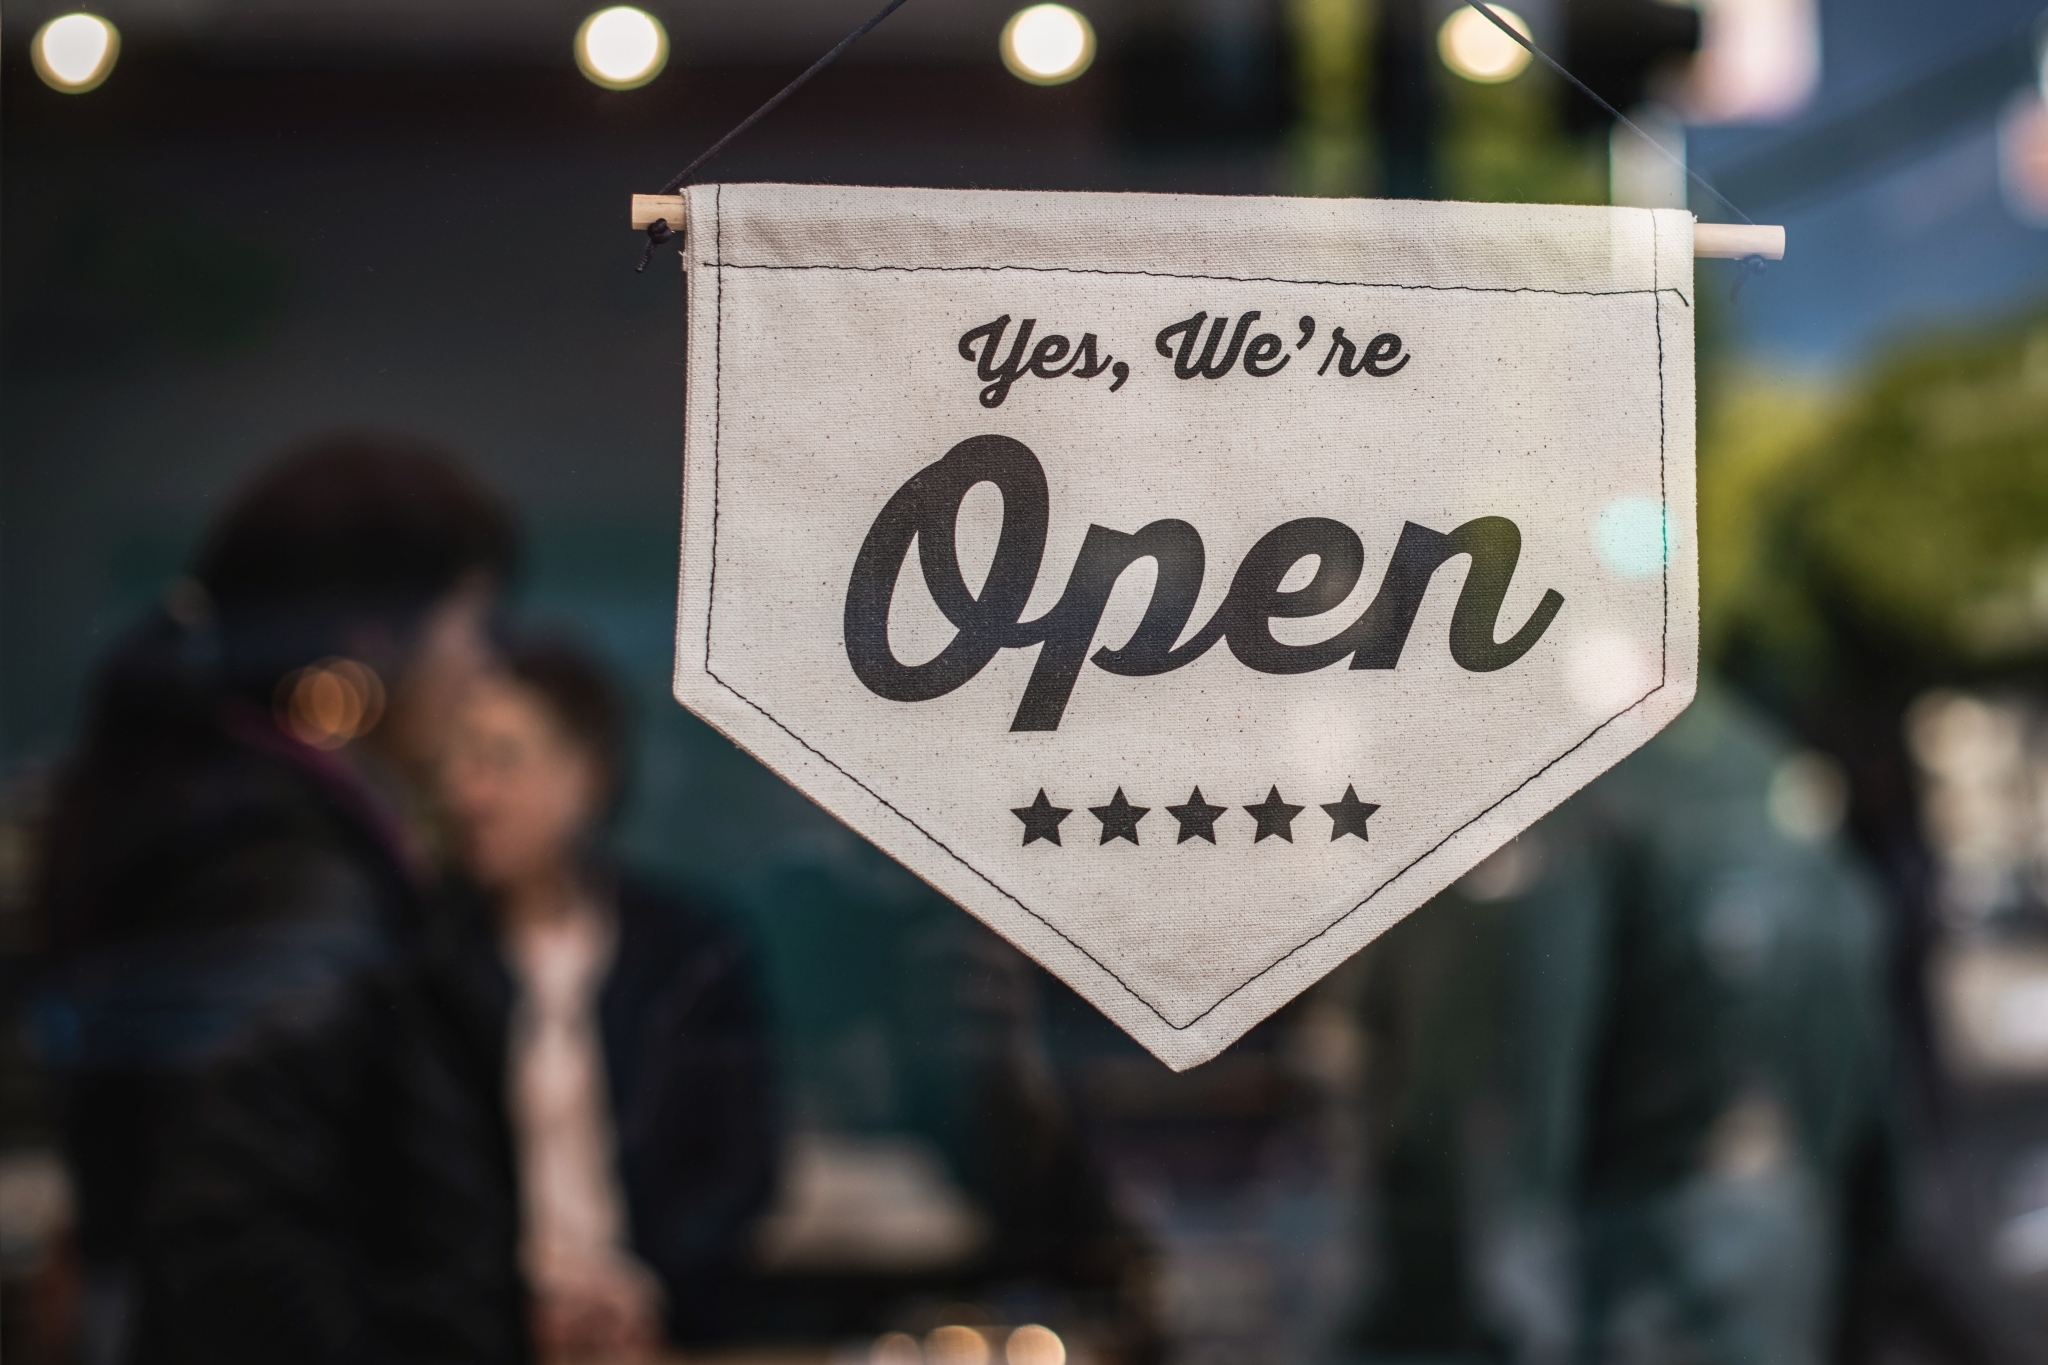 A sign reading, "Yes, we're open" hanging in a business window.